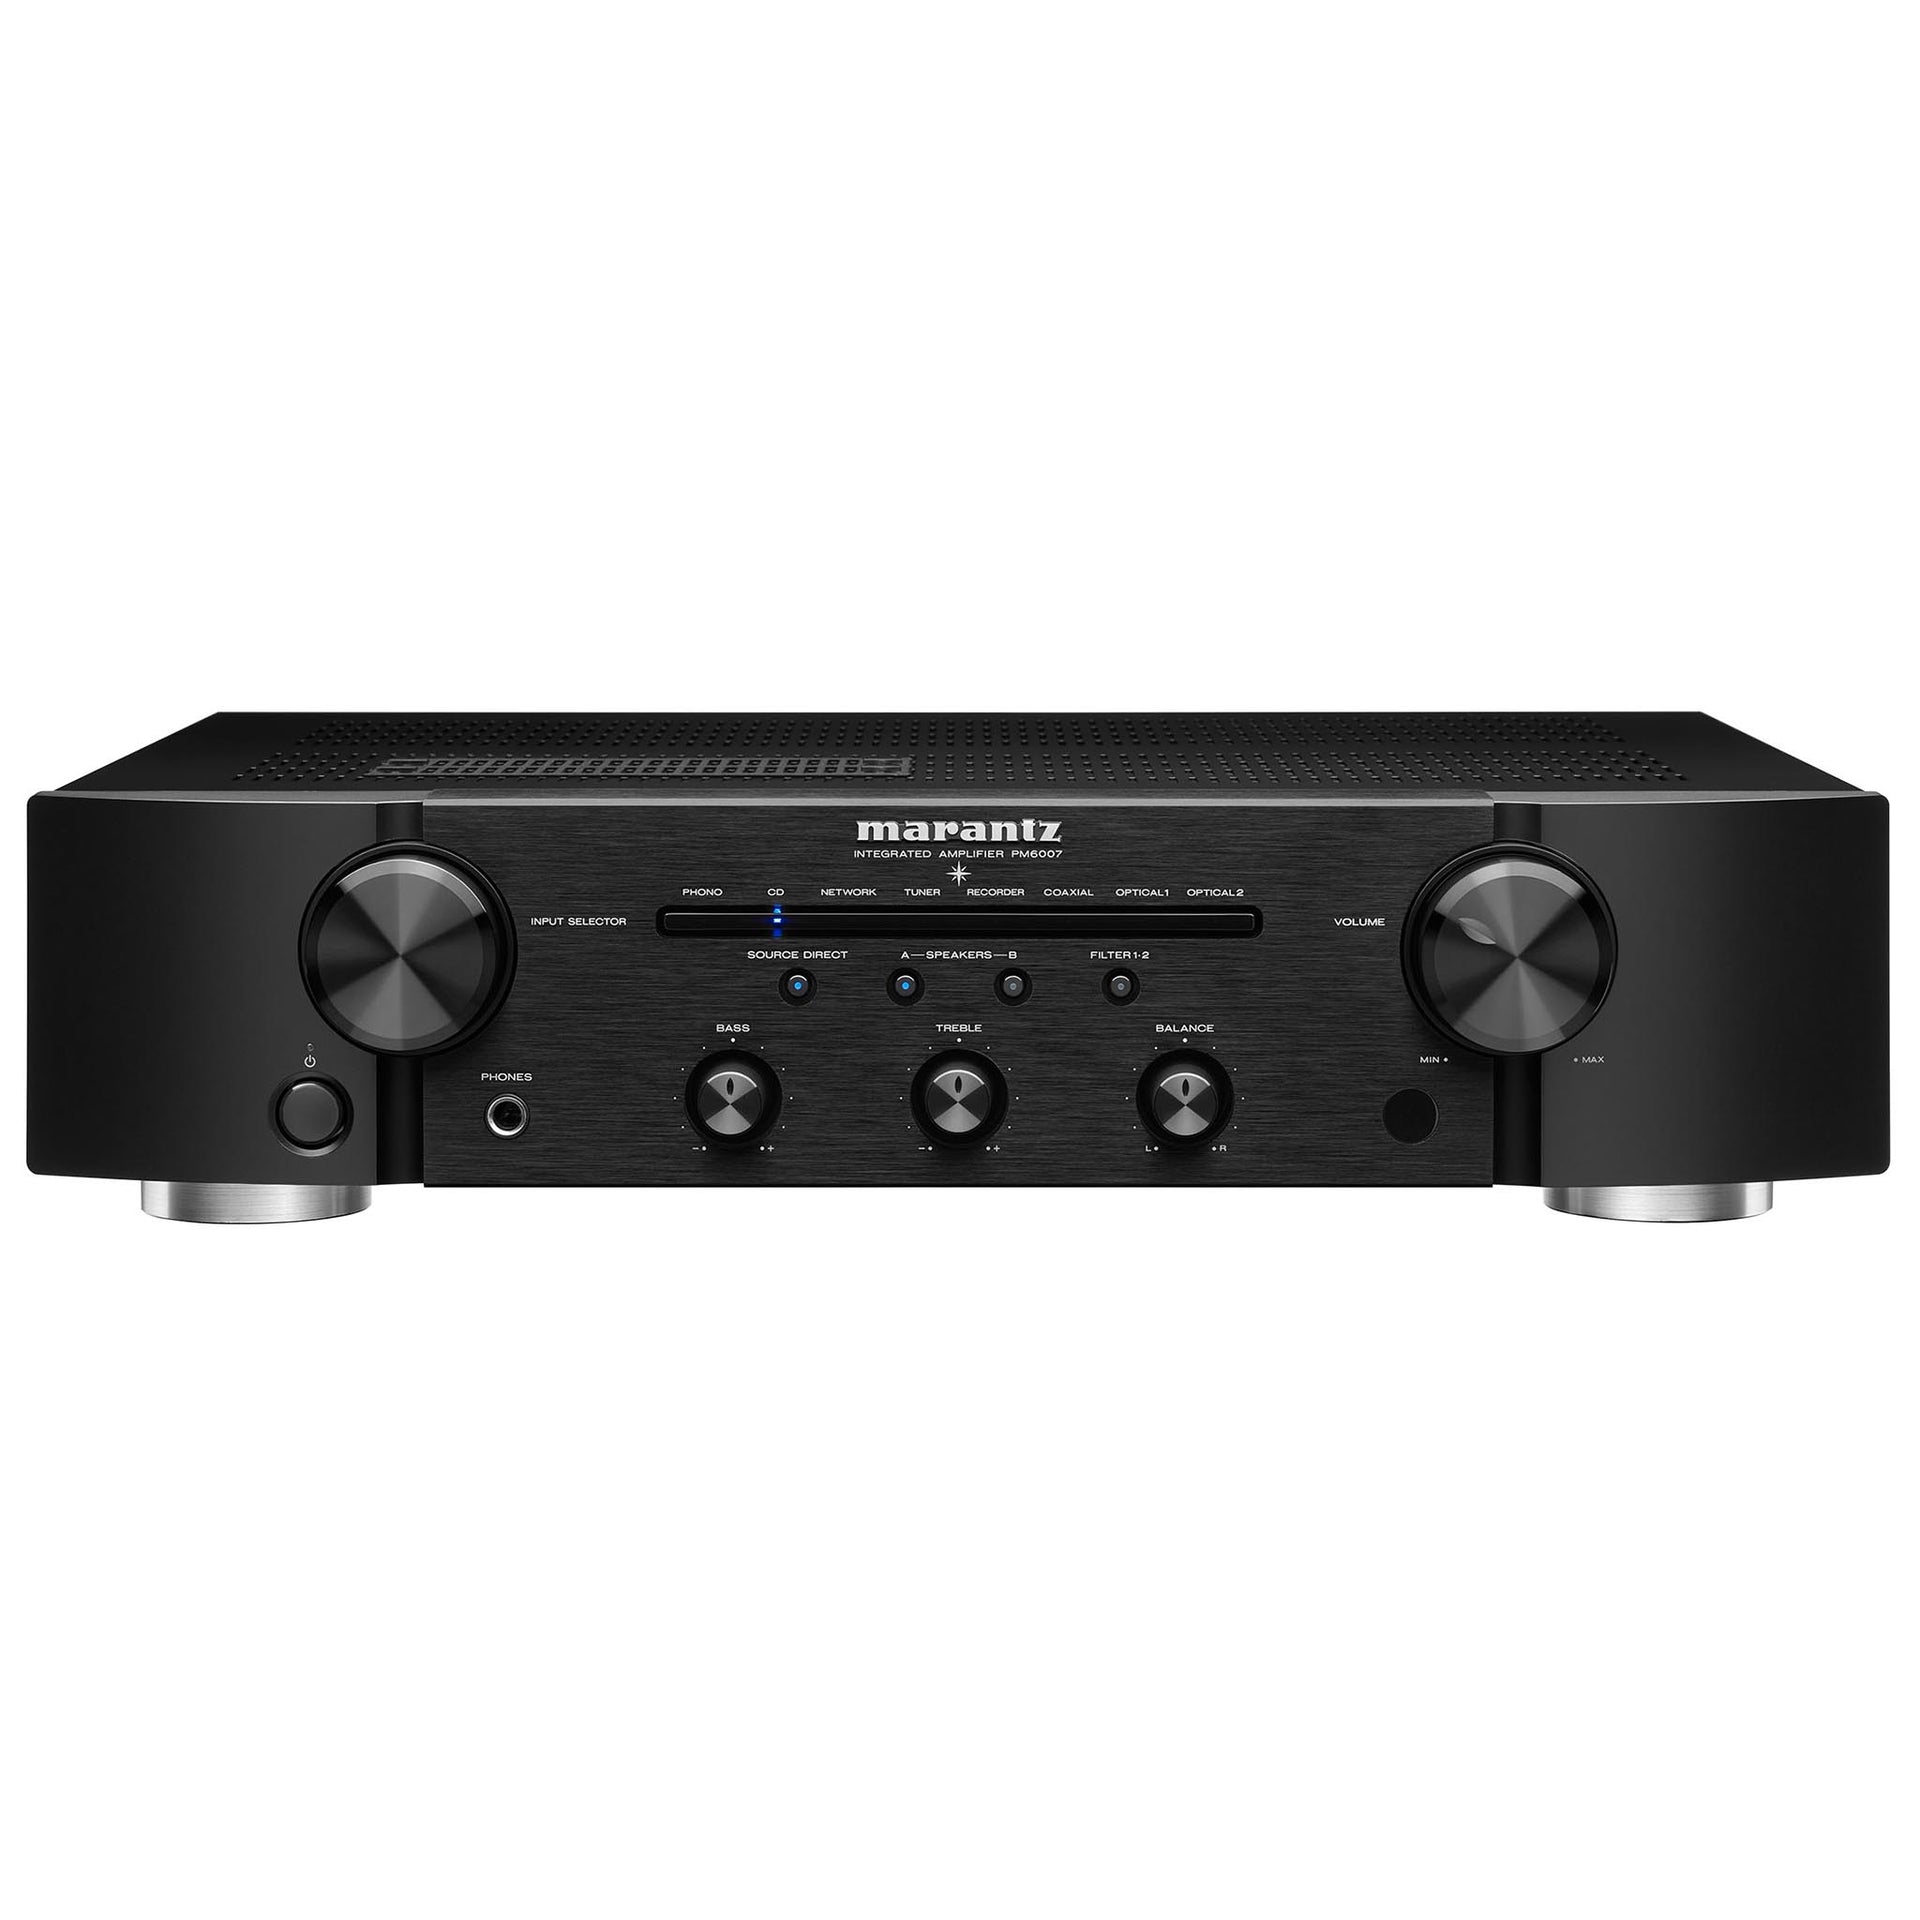 Marantz launches PM6007 integrated amplifier and CD6007 CD player